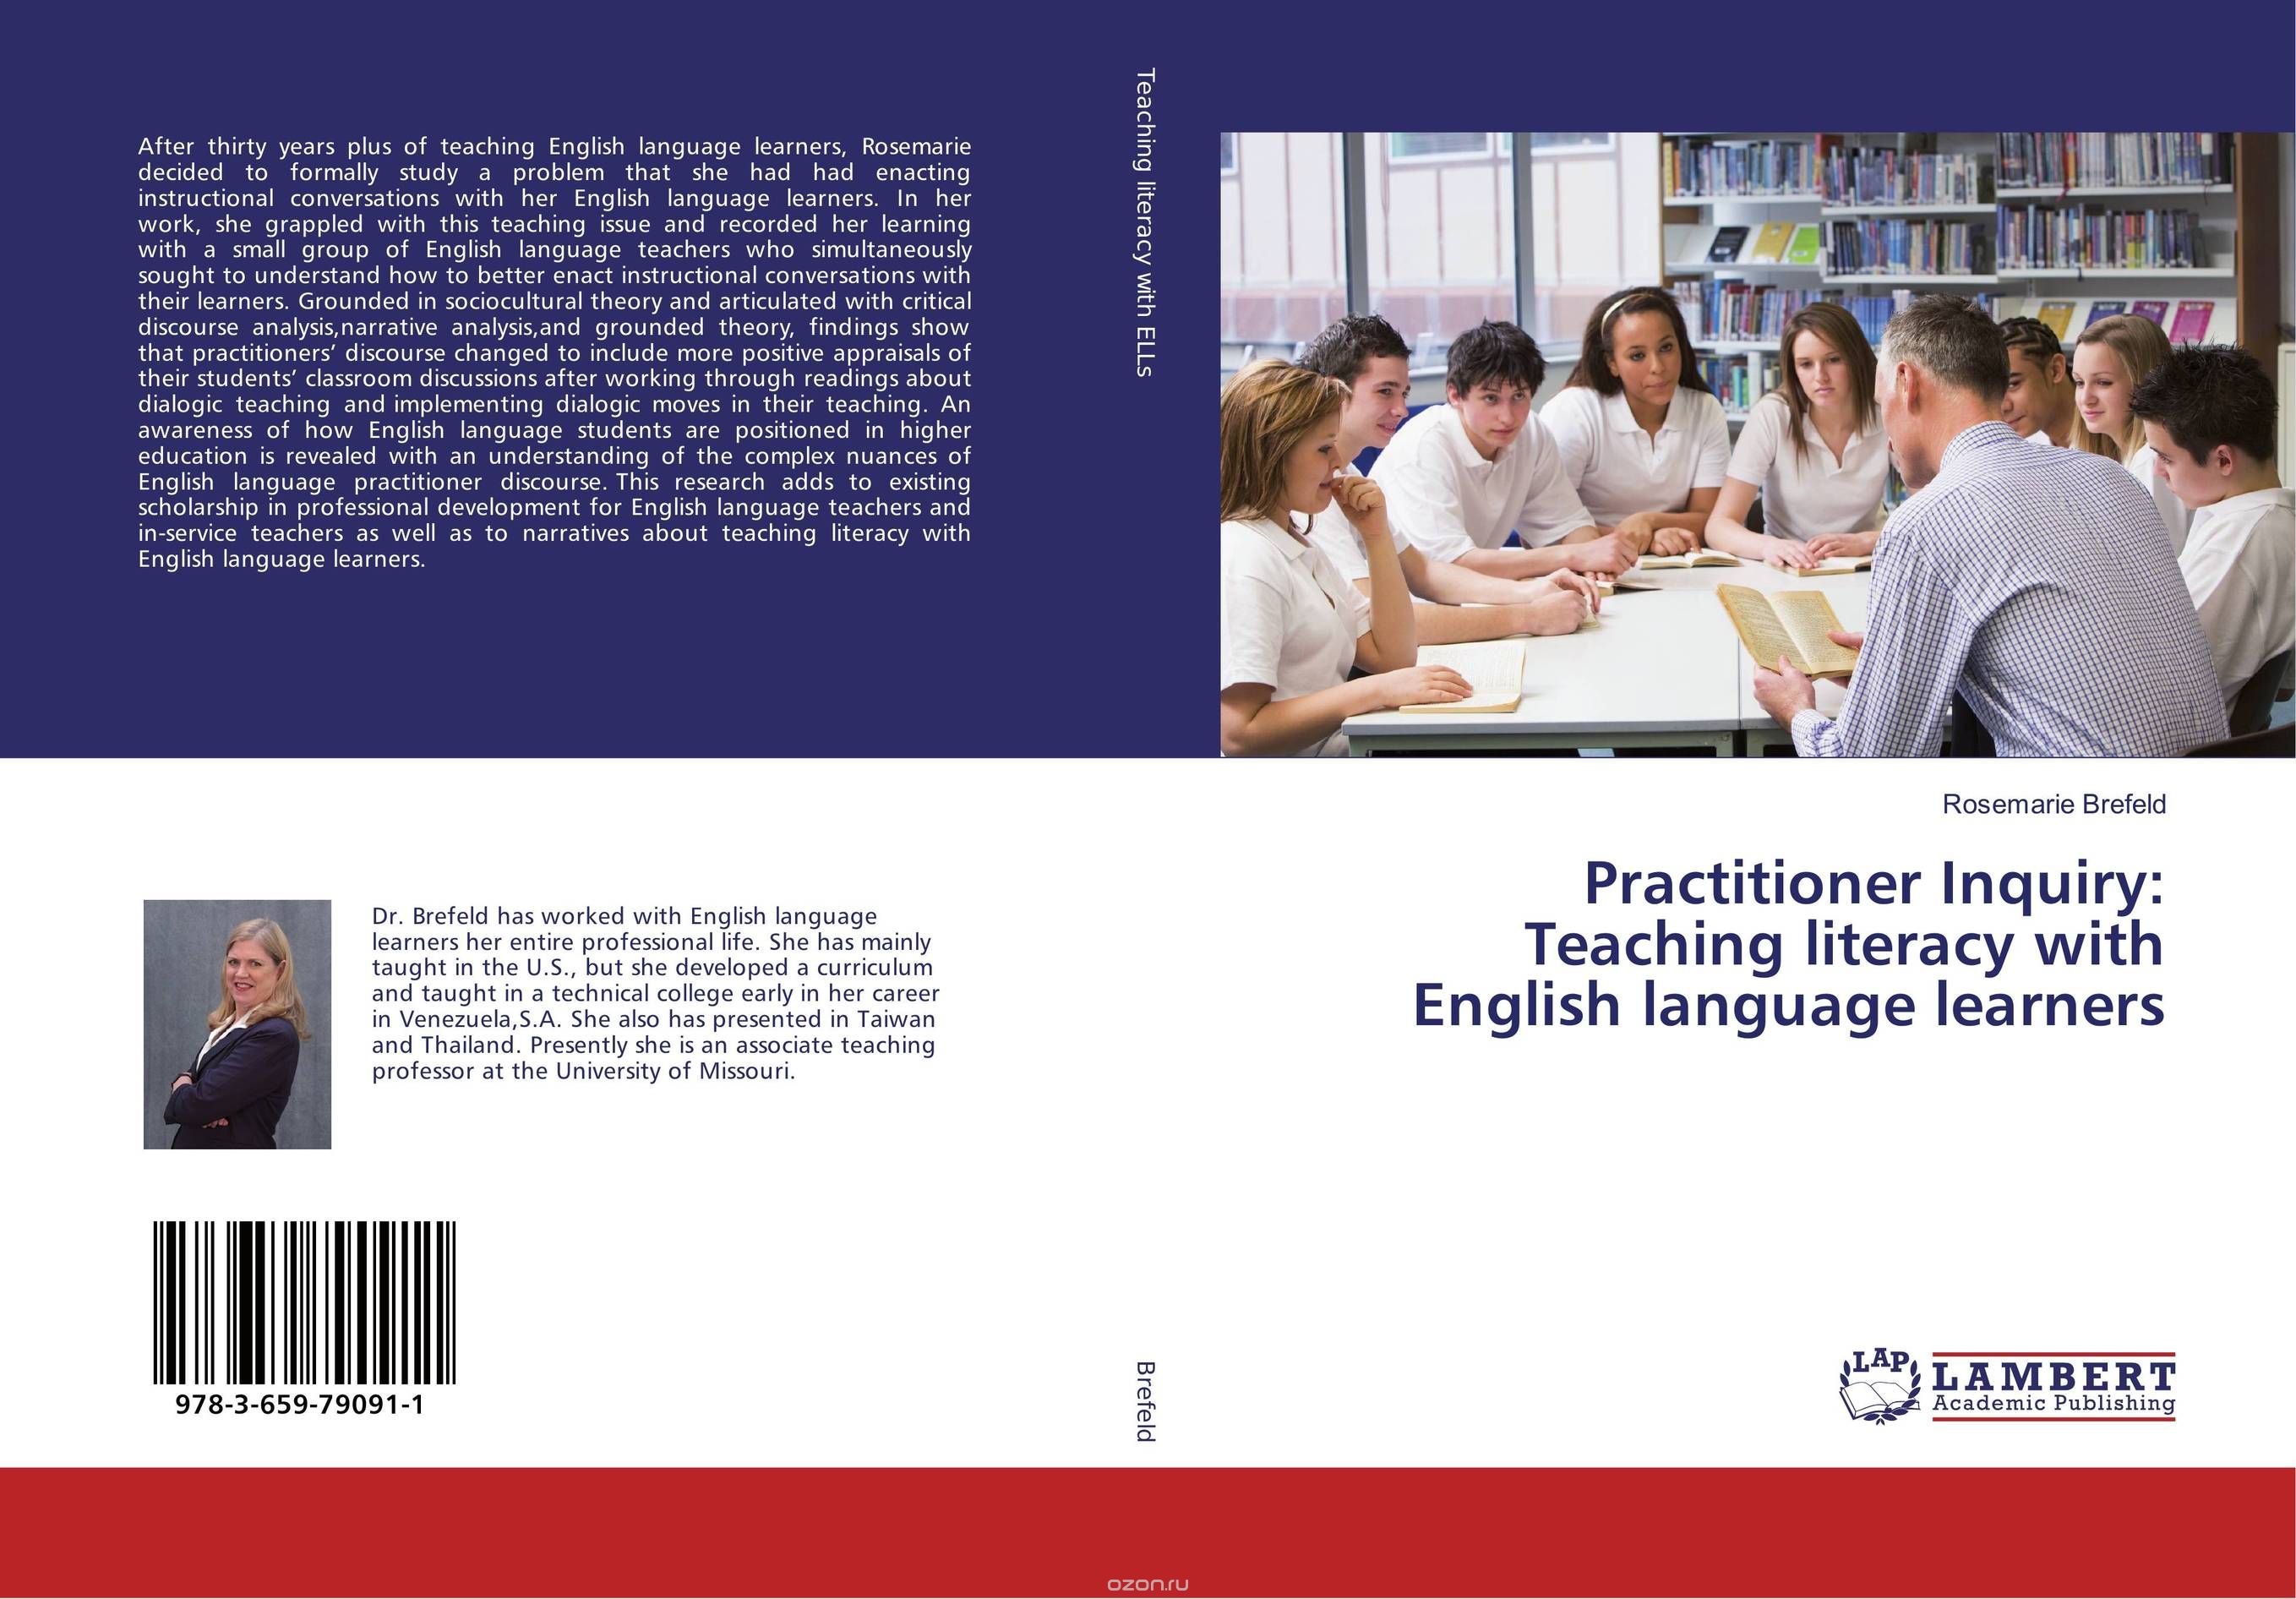 Practitioner Inquiry: Teaching literacy with English language learners